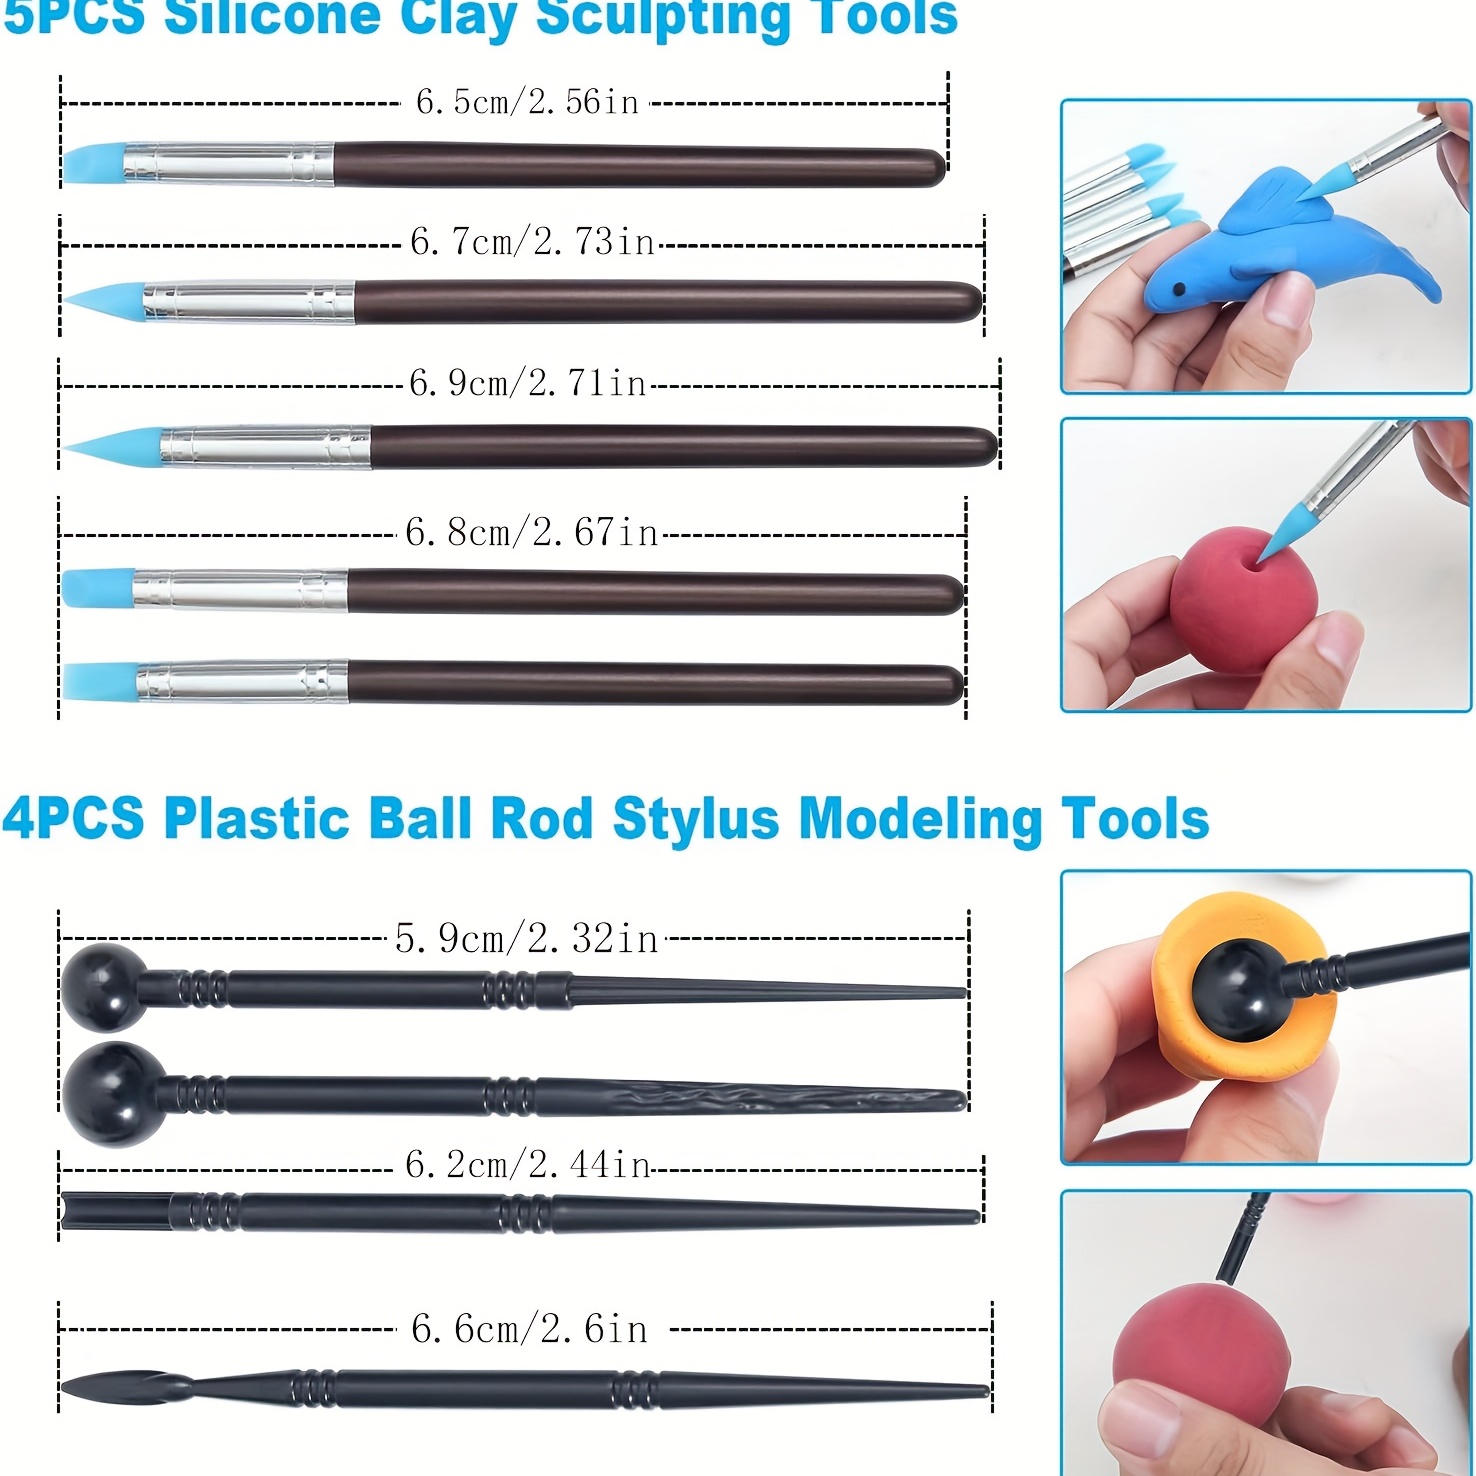 Sculpey Tools 5 in 1 Clay Modeling Tool Set